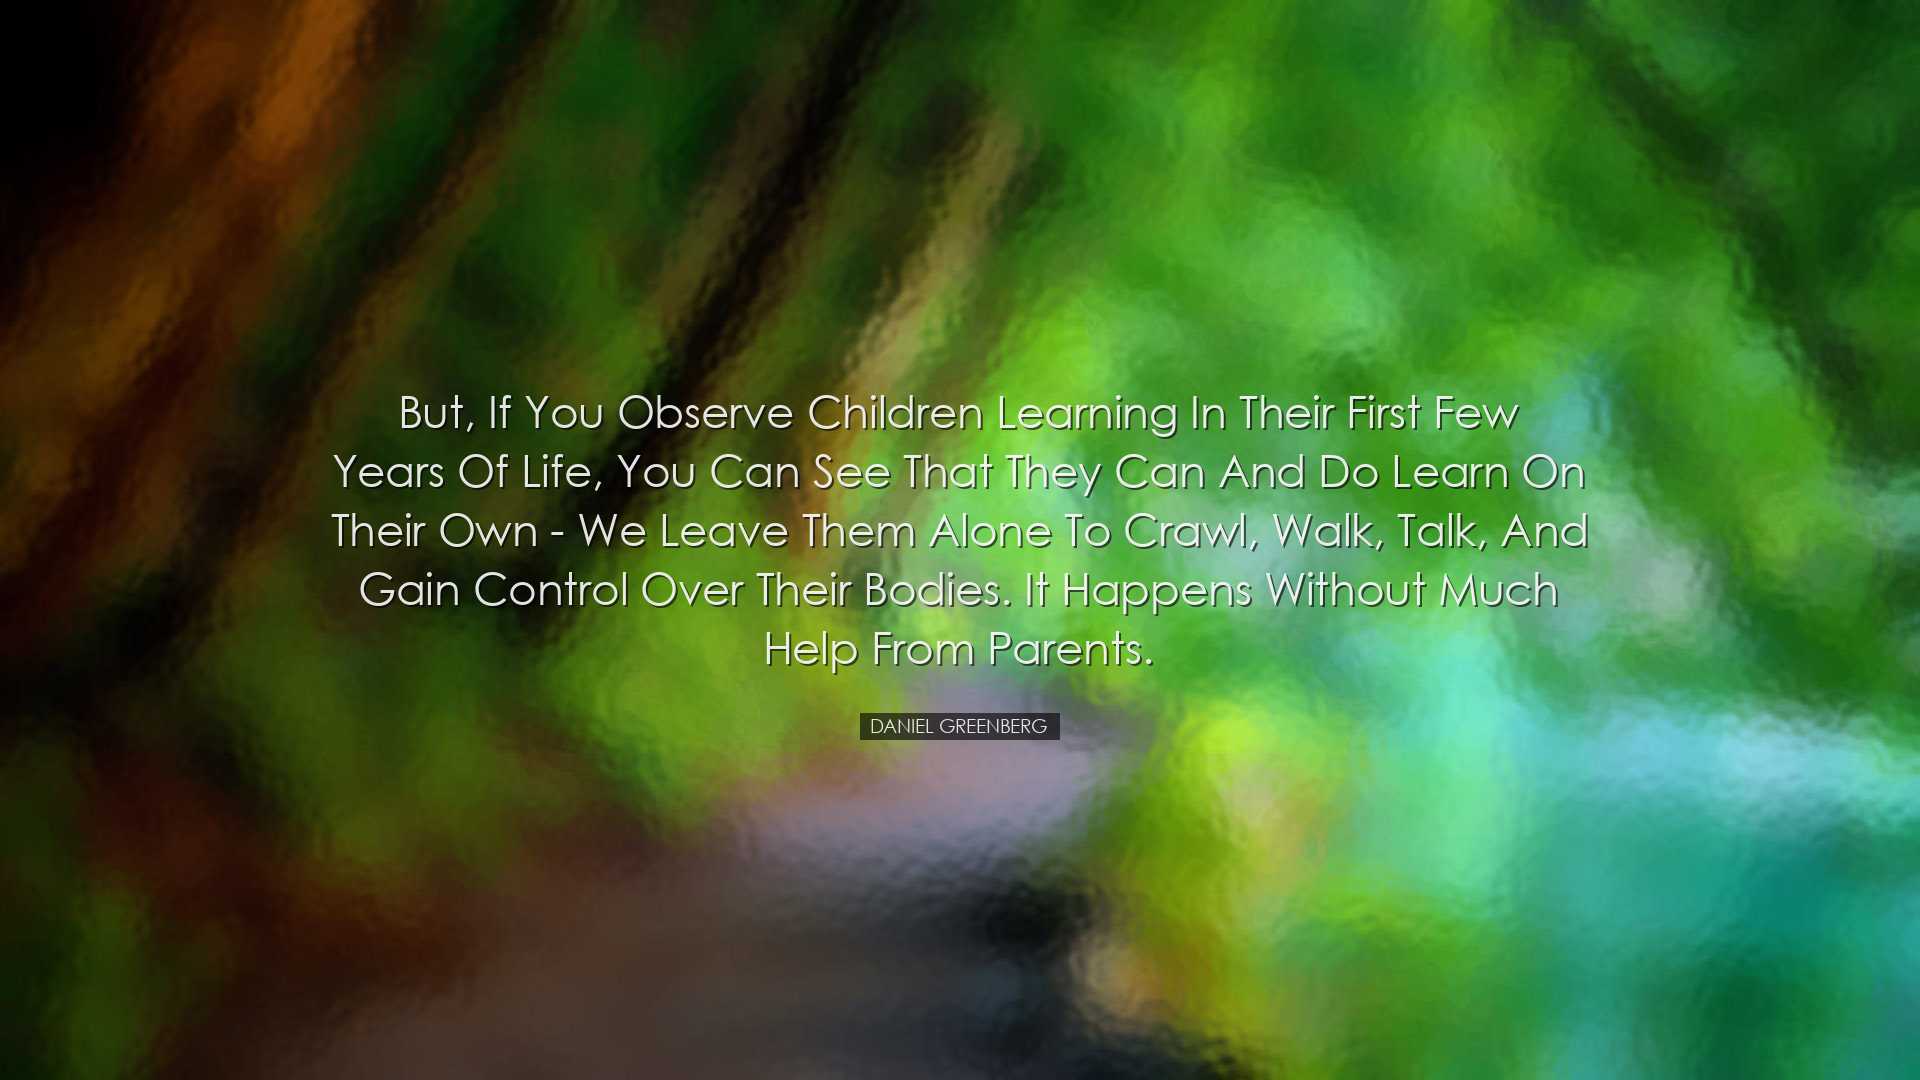 But, if you observe children learning in their first few years of